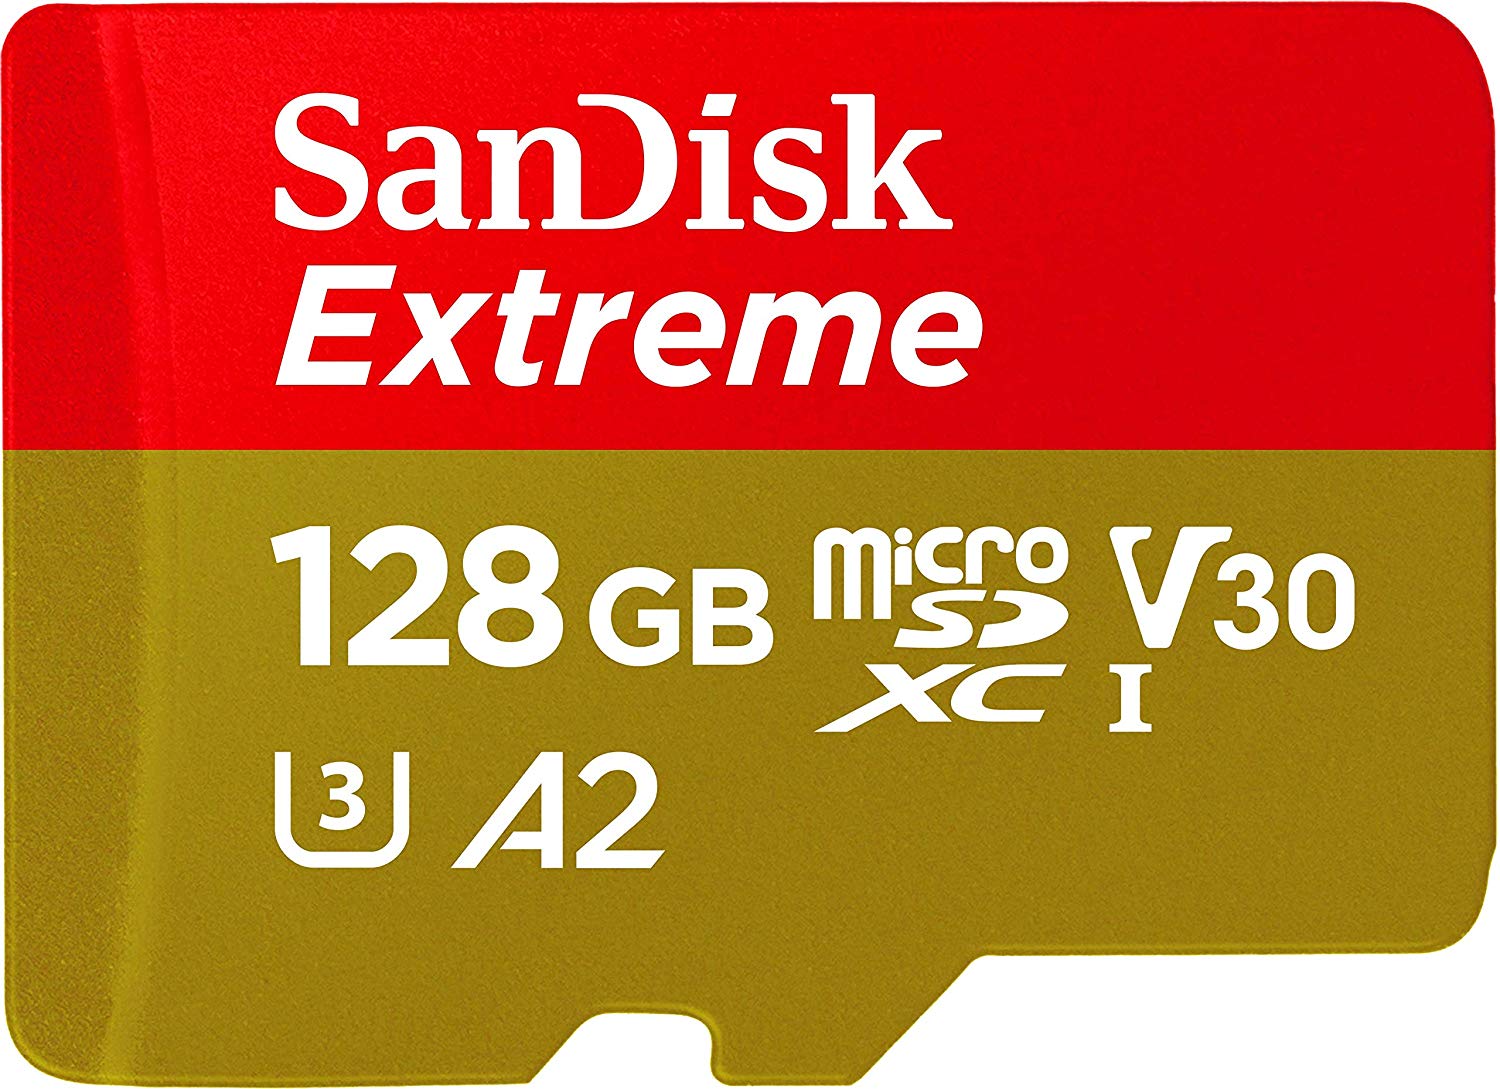 SanDisk 128GB Extreme microSDXC UHS-I Memory Card with Adapter - 160MB/s, U3, V30, 4K UHD, A2, Micro SD Card - SDSQXA1-128G-GN6MA - image 1 of 2